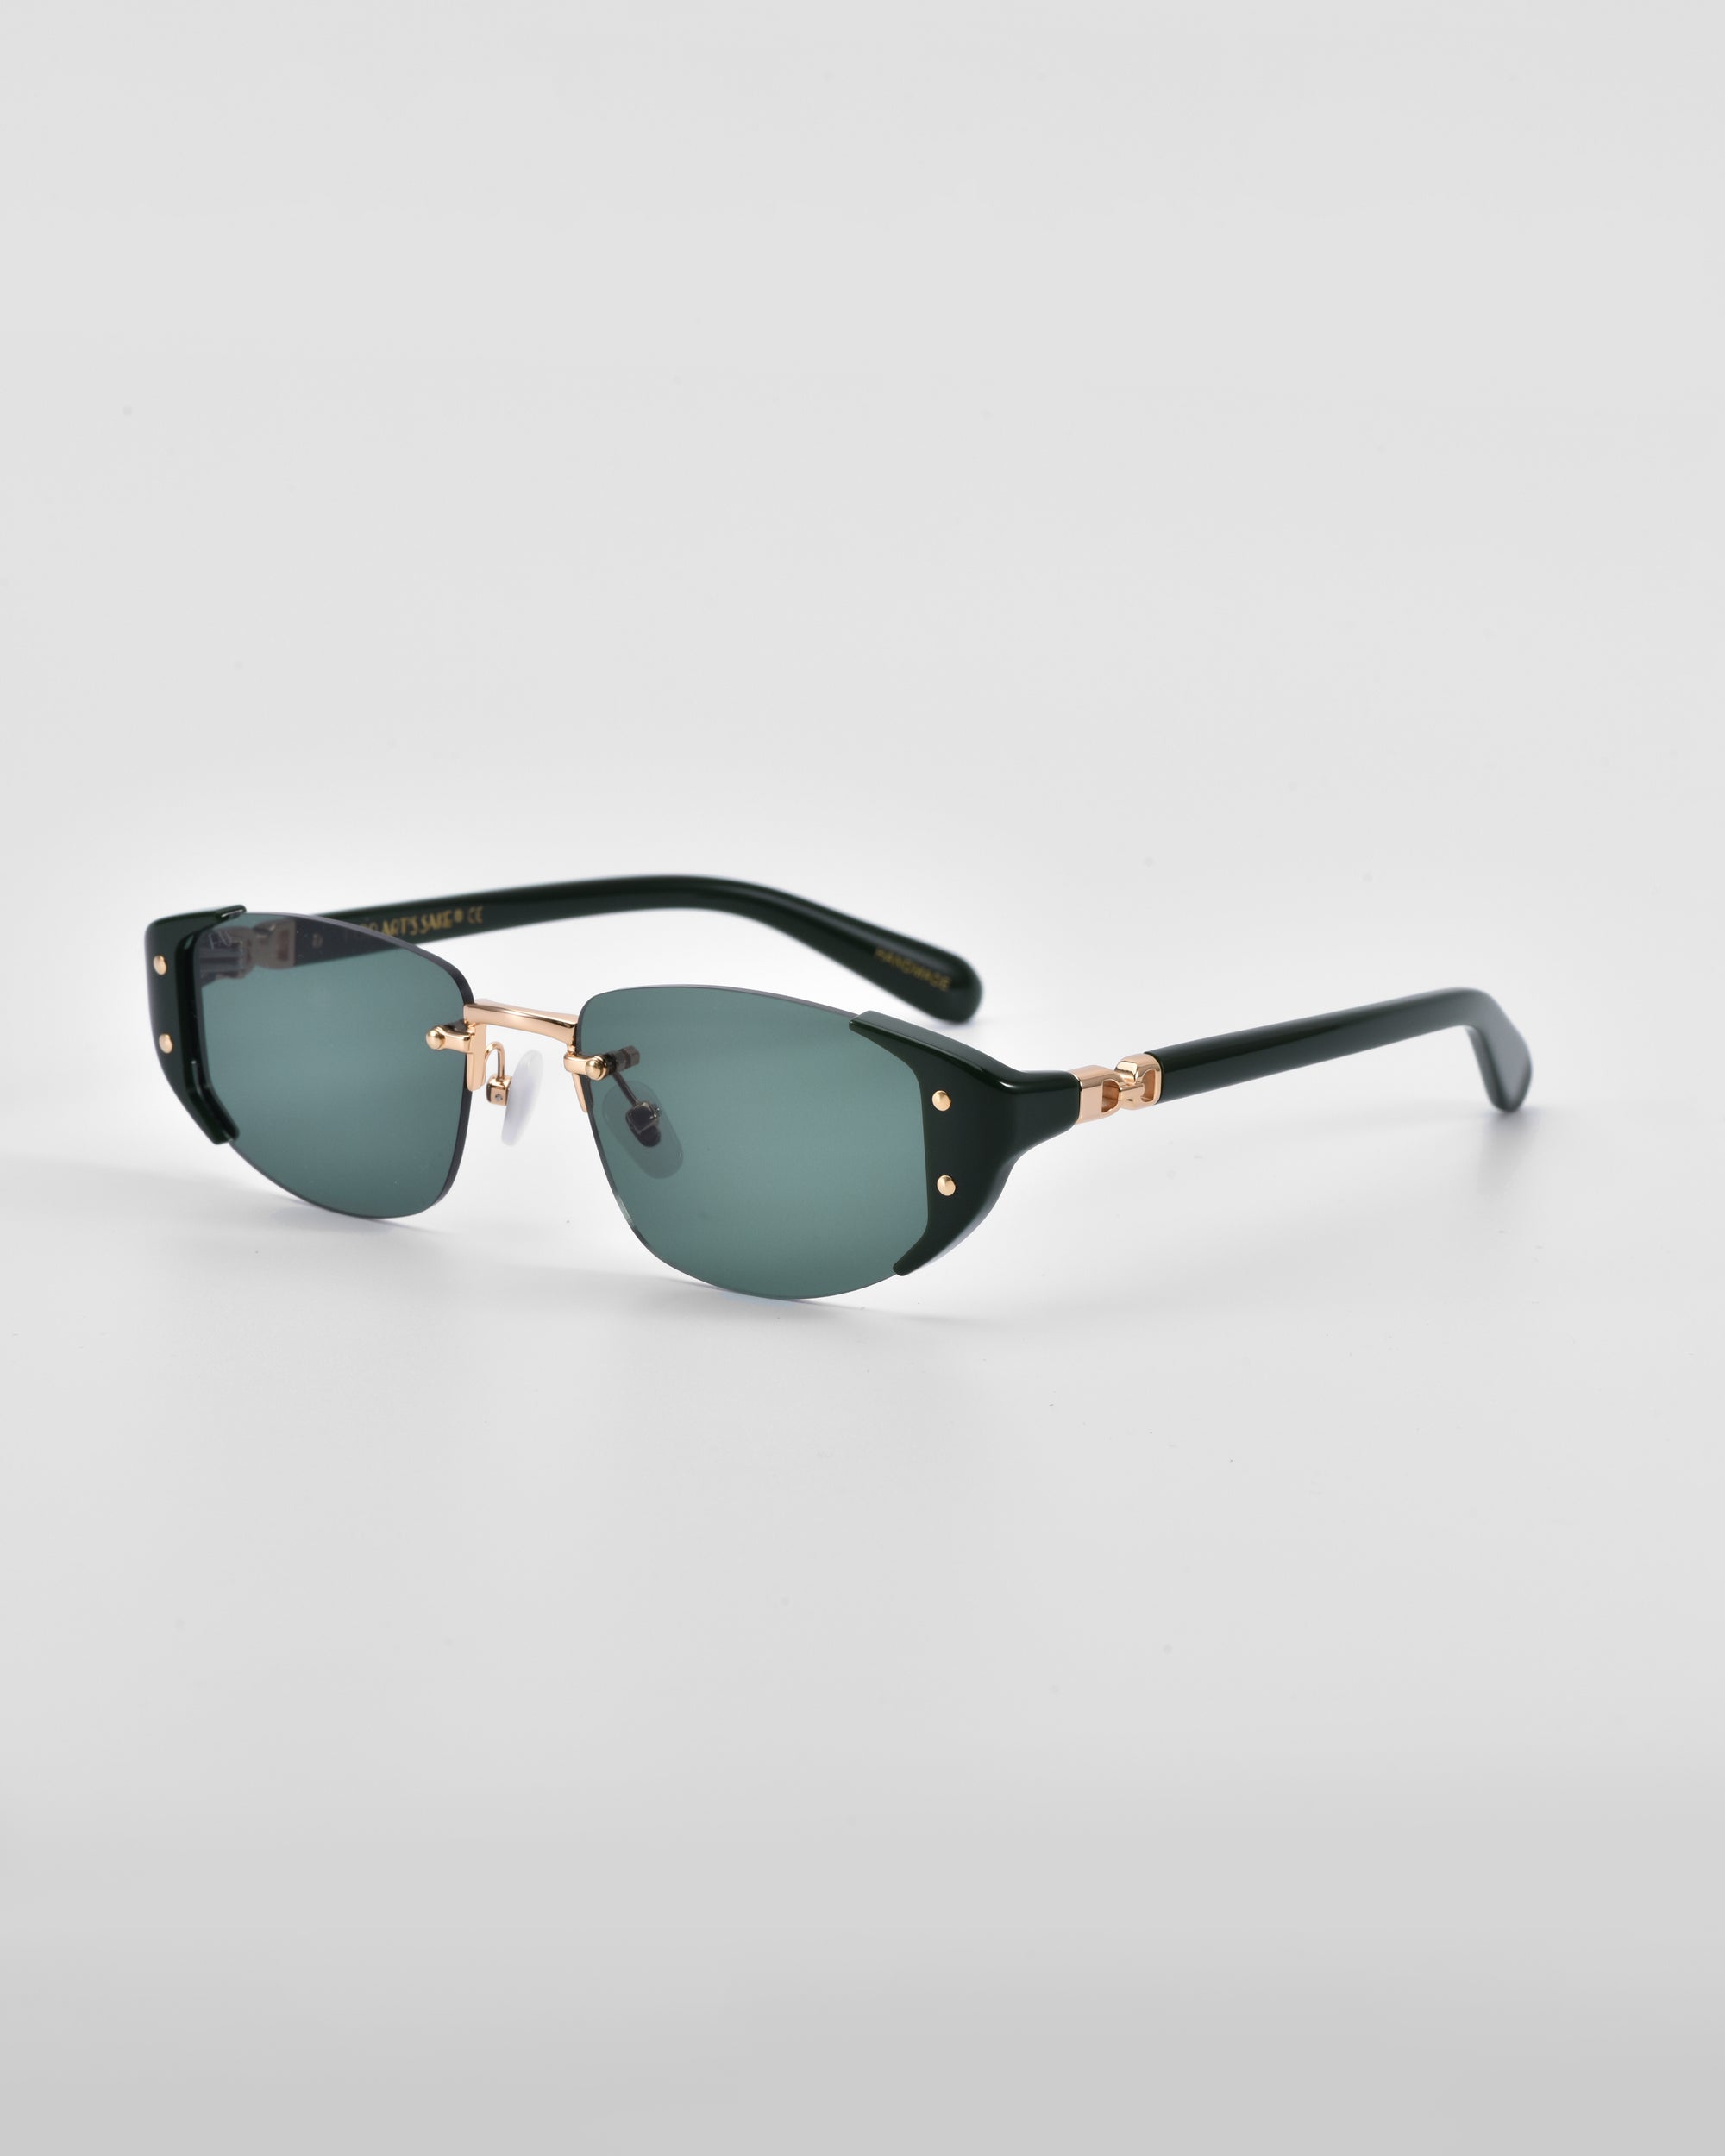 A pair of For Art&#39;s Sake® Harbour sunglasses featuring dark green lenses, black rims, and 18 karat gold plating on the hinges and nose bridge. These retro-inspired sunglasses are set against a plain light gray background.